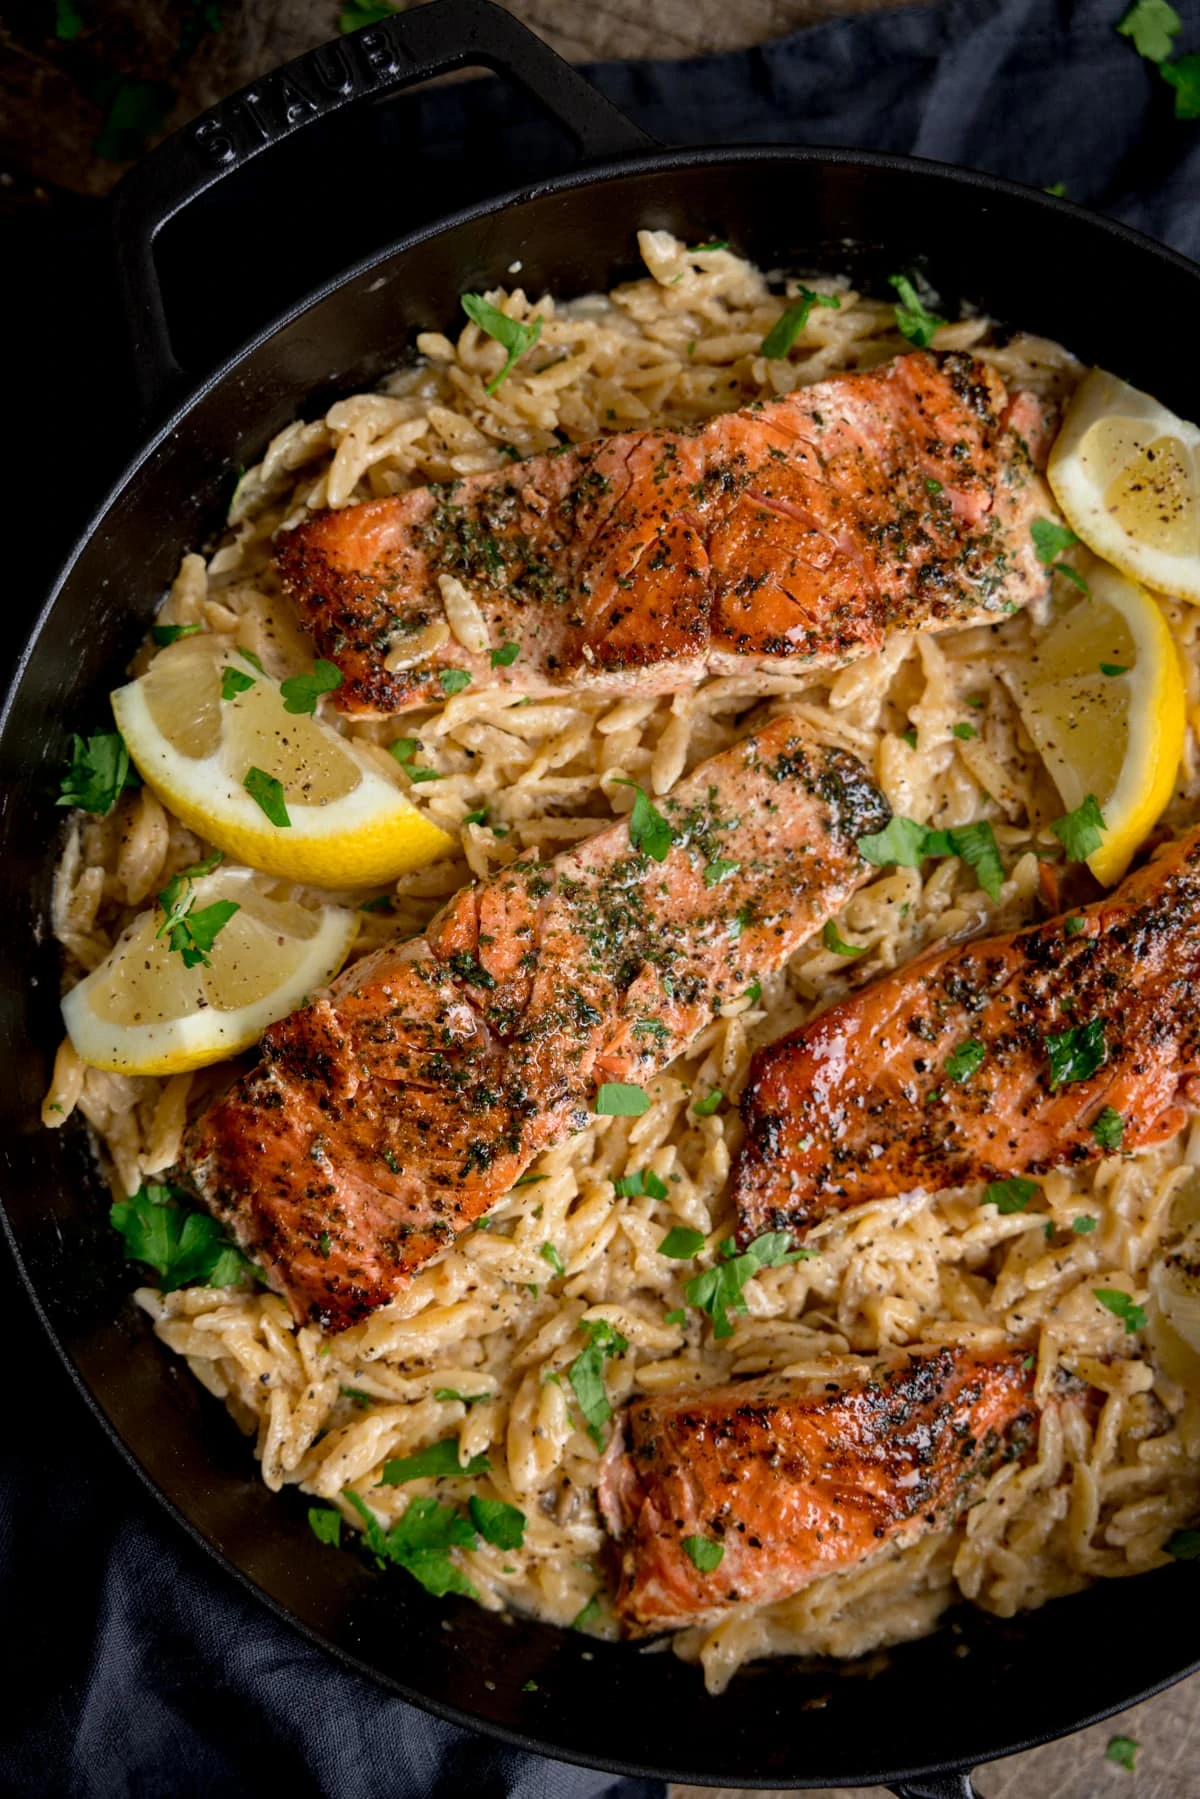 Overhead image of pan-fried salmon fillets nestled in a bed of creamy lemon orzo topped with parsley. There are lemon wedges at the edges of the pan.